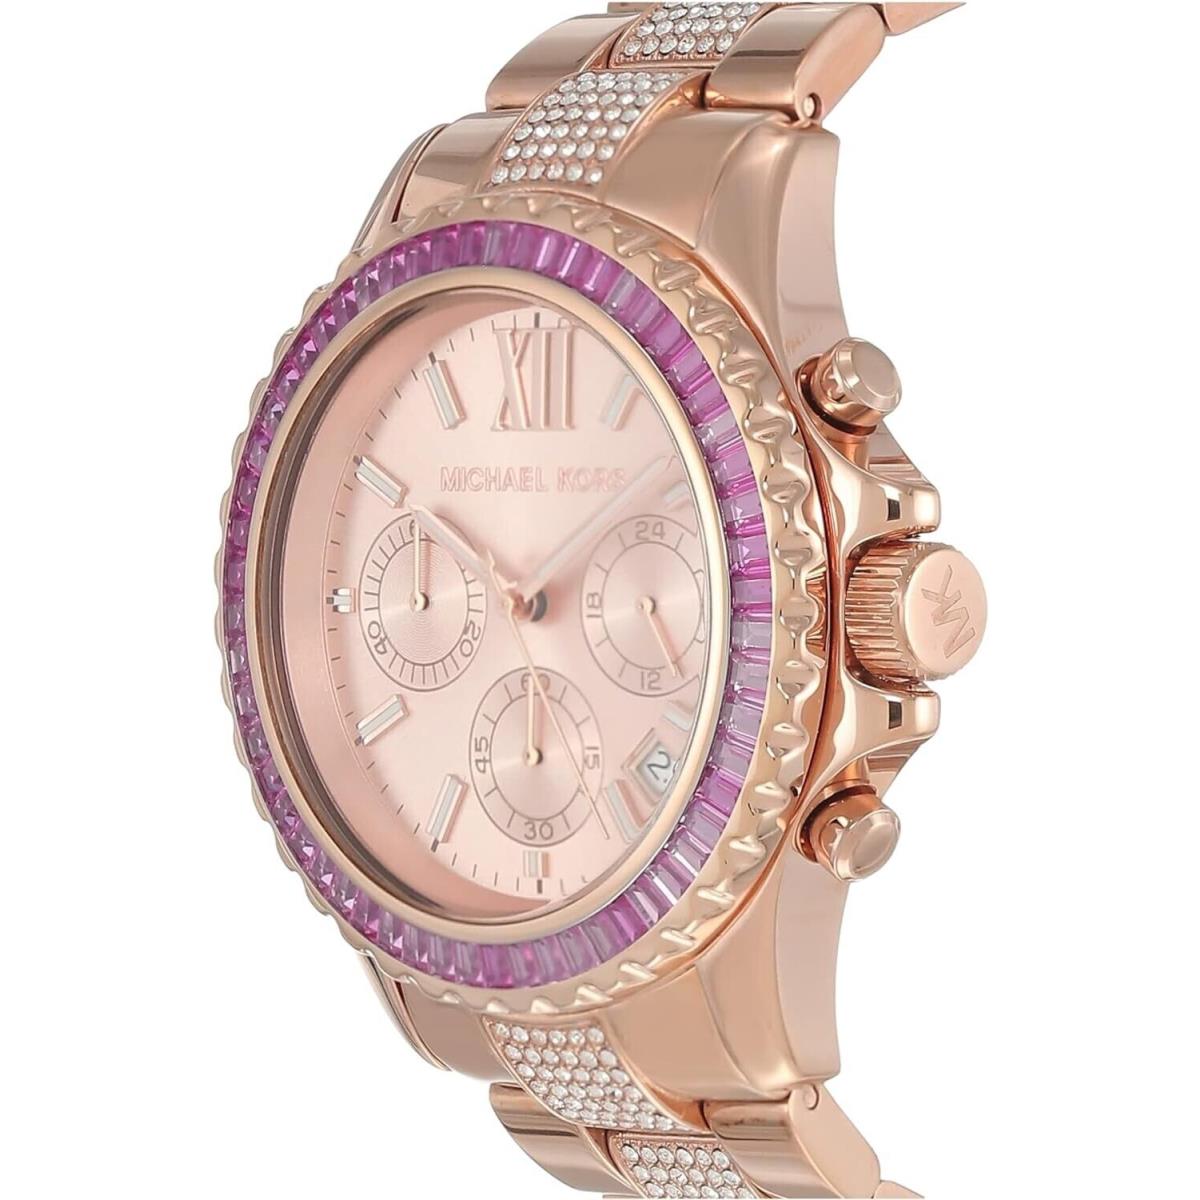 Michael Kors Everest Women`s Rose Gold Pink Stainless Chronograph Watch MK7211 - Dial: Rose Gold, Band: Rose Gold, Bezel: Pink